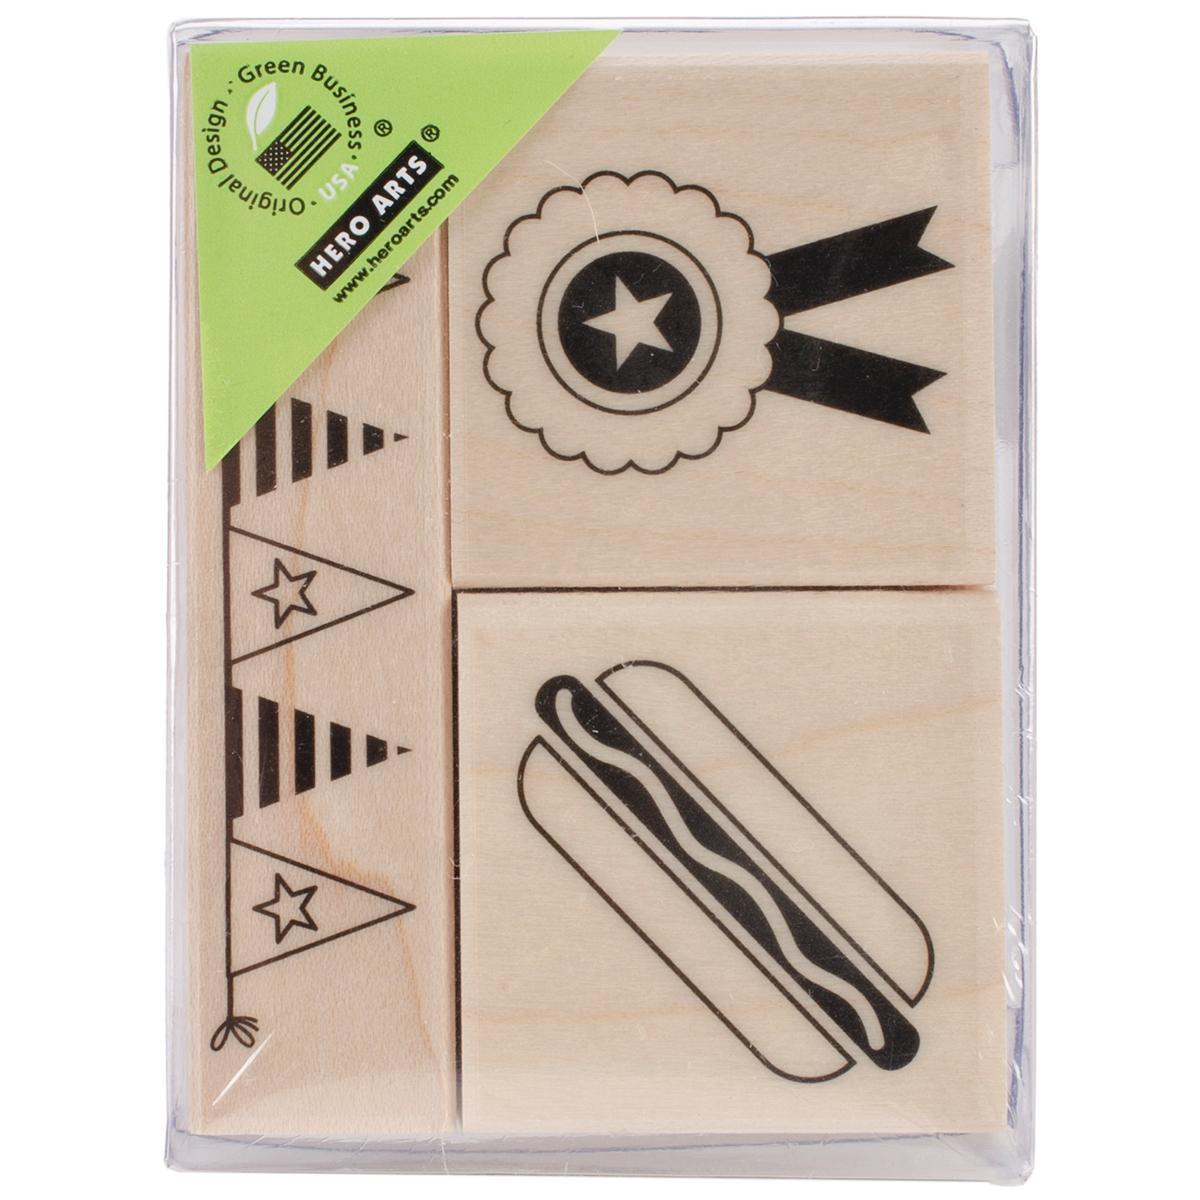 Hero Arts Mounted Rubber Stamps   So Much Fun   15686999  